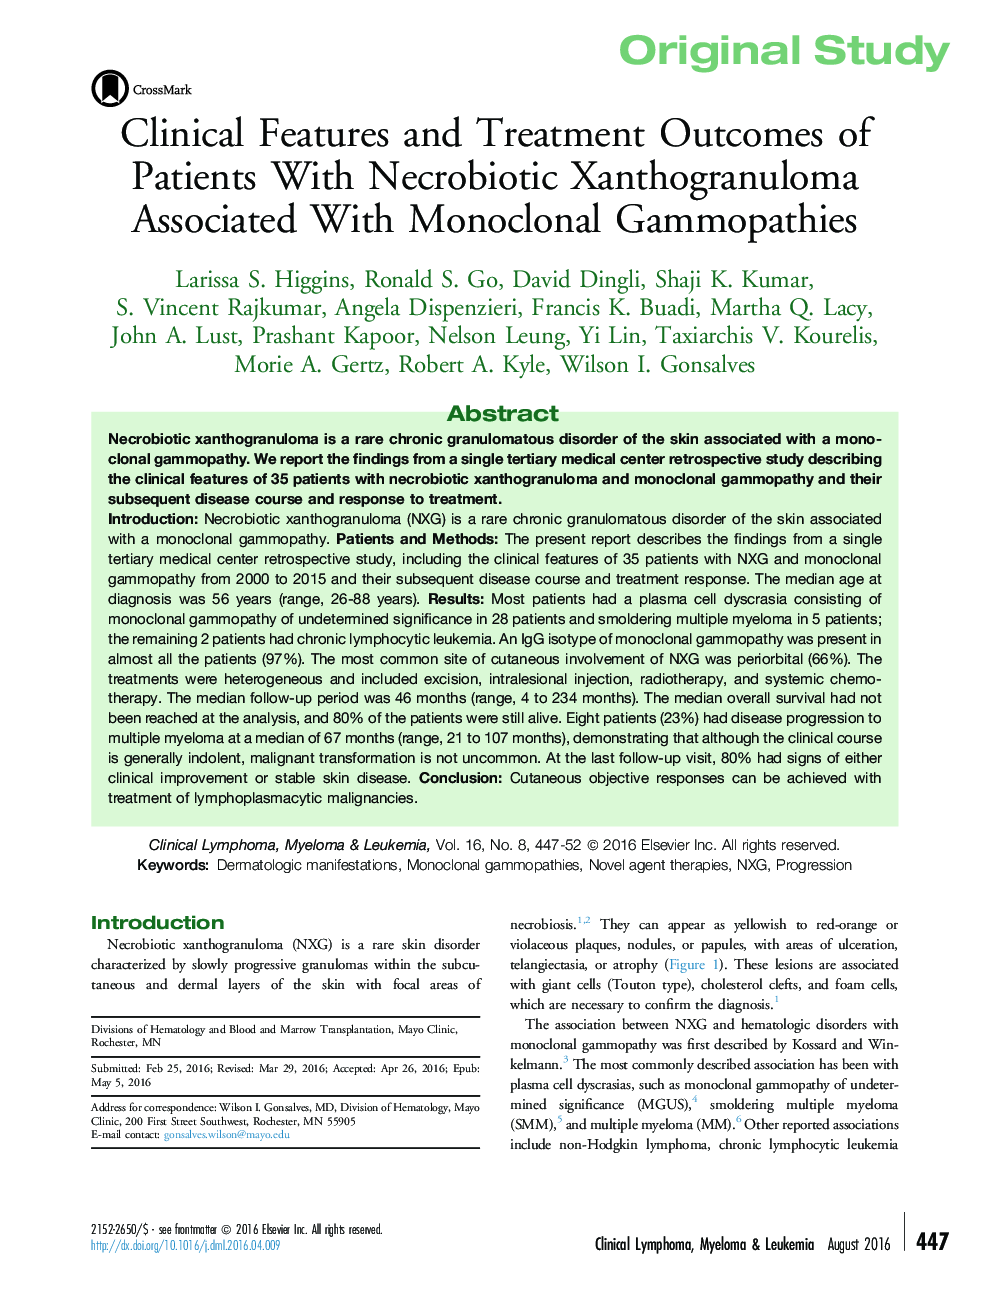 Clinical Features and Treatment Outcomes of Patients With Necrobiotic Xanthogranuloma Associated With Monoclonal Gammopathies